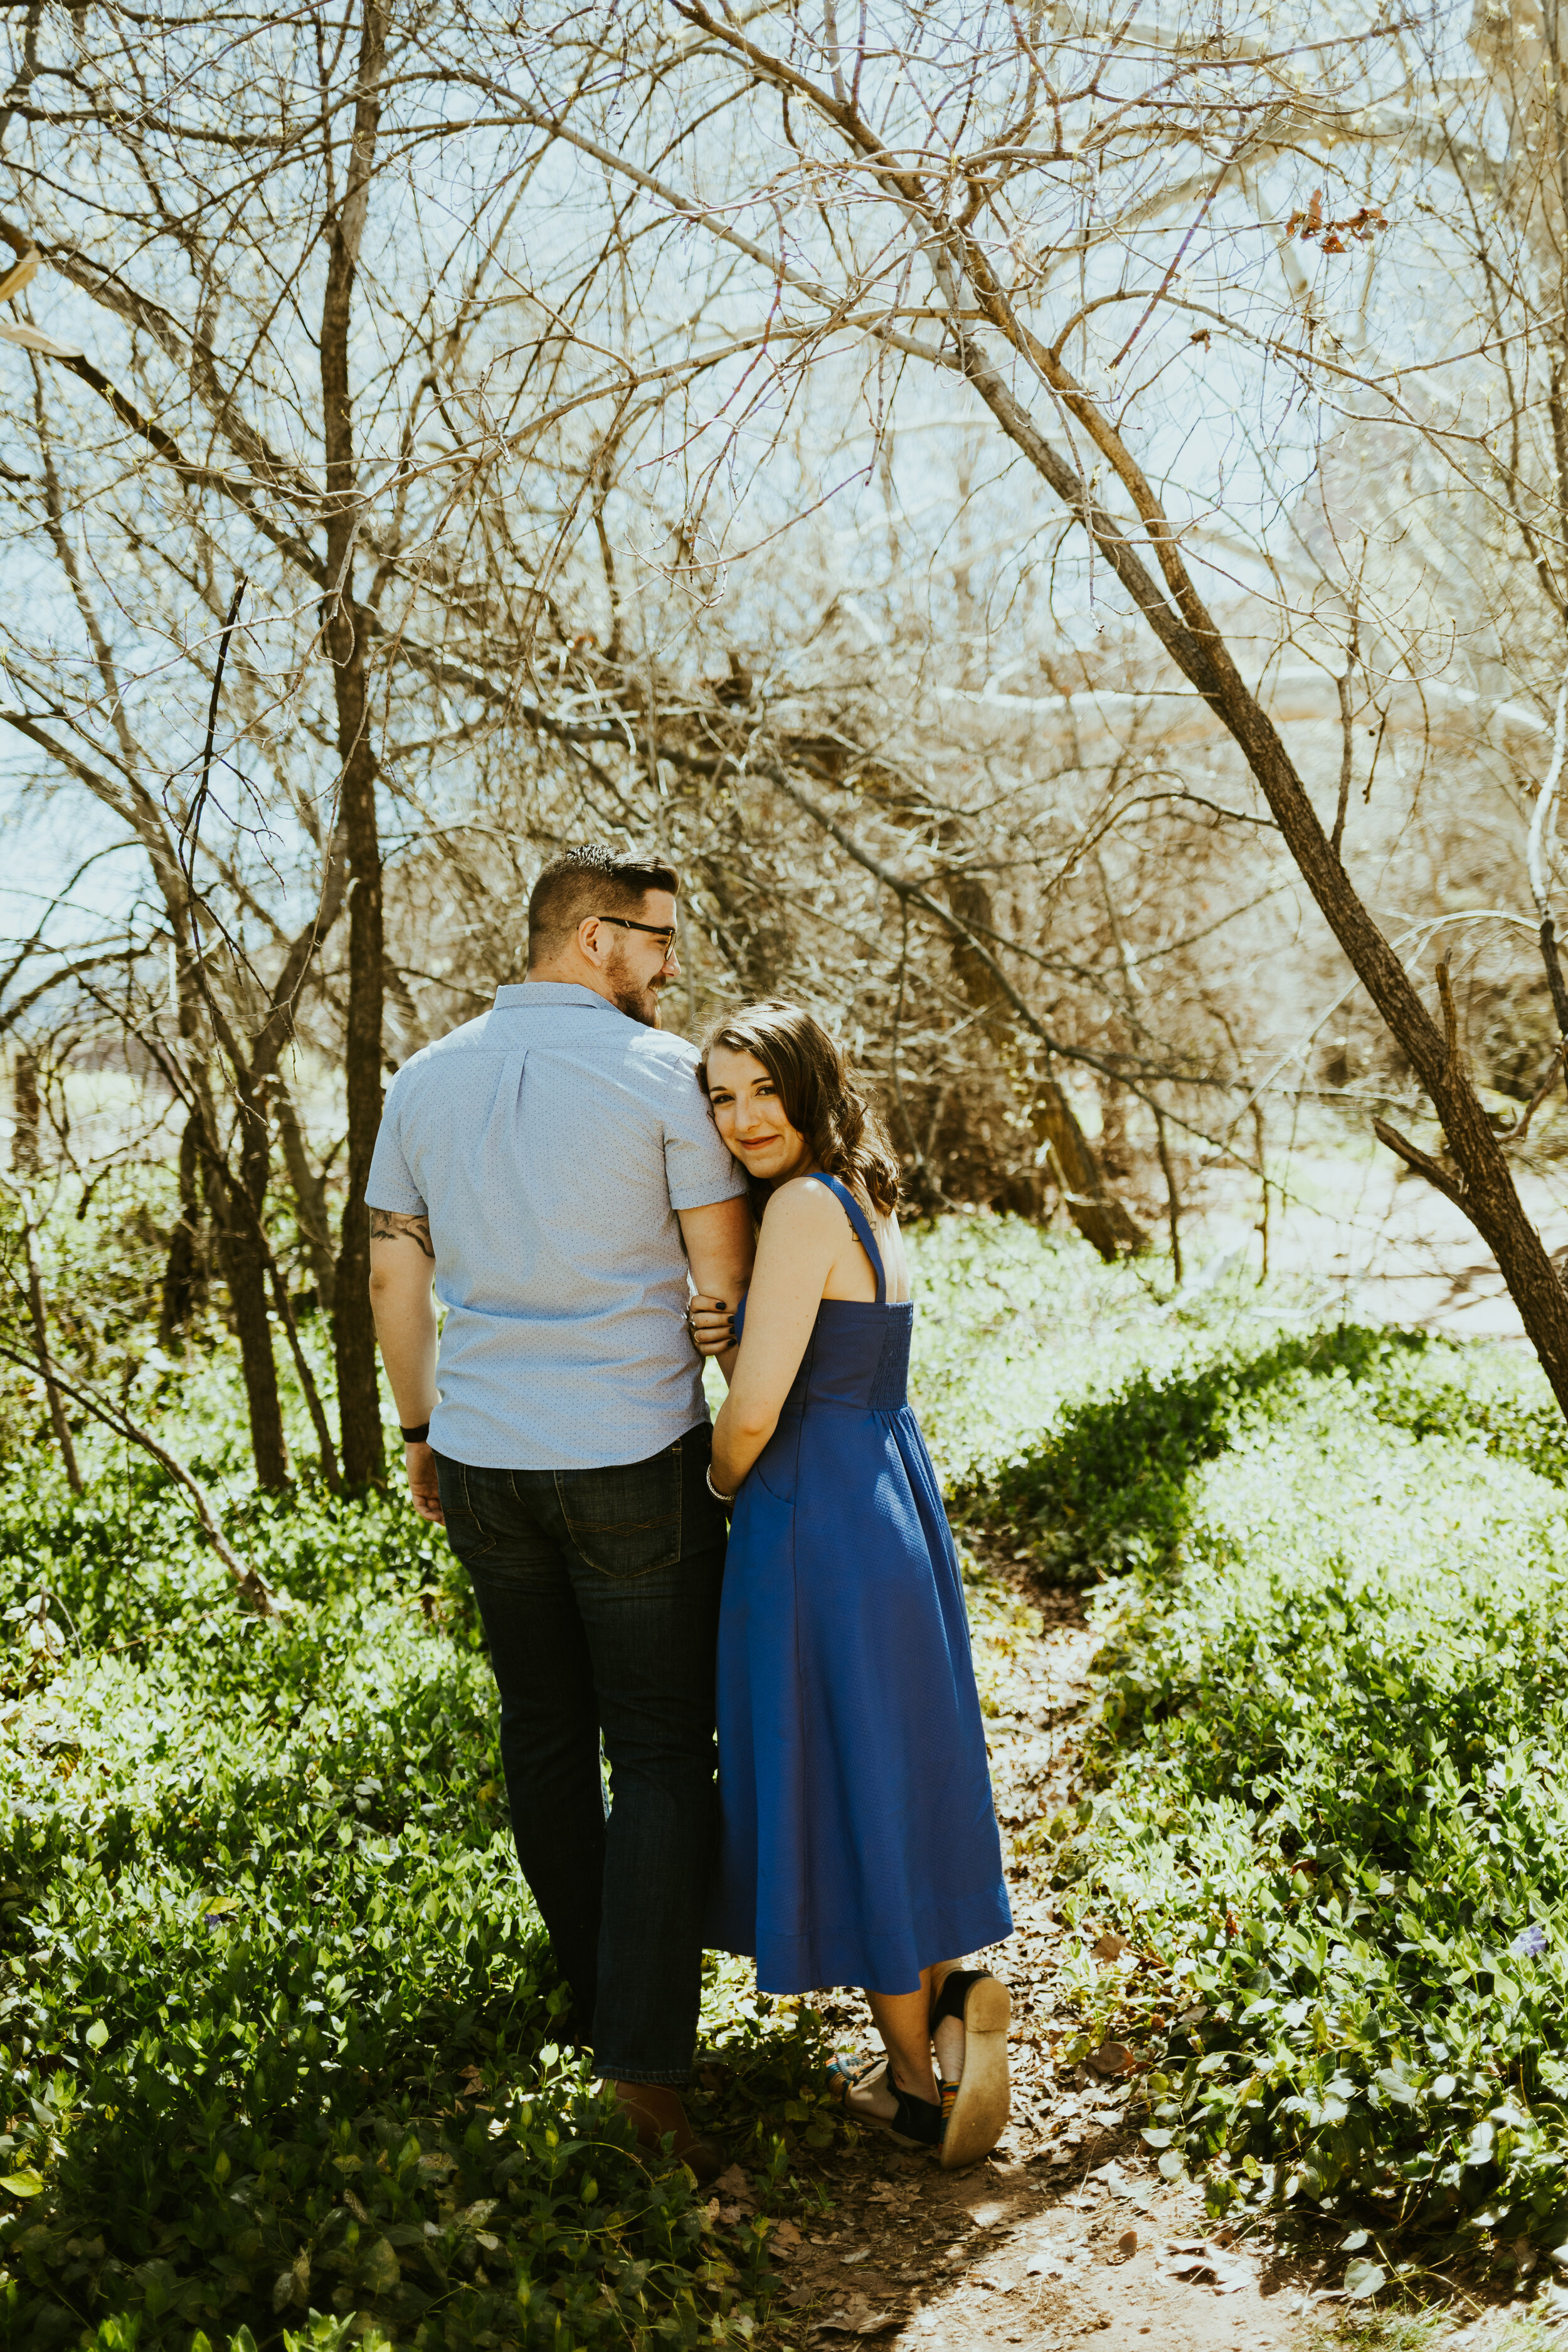 red rock crossing sedona arizona cathedral rock crescent moon ranch couple photos engagement photo outfit inspiration couple posing ideas midday photos-8.jpg